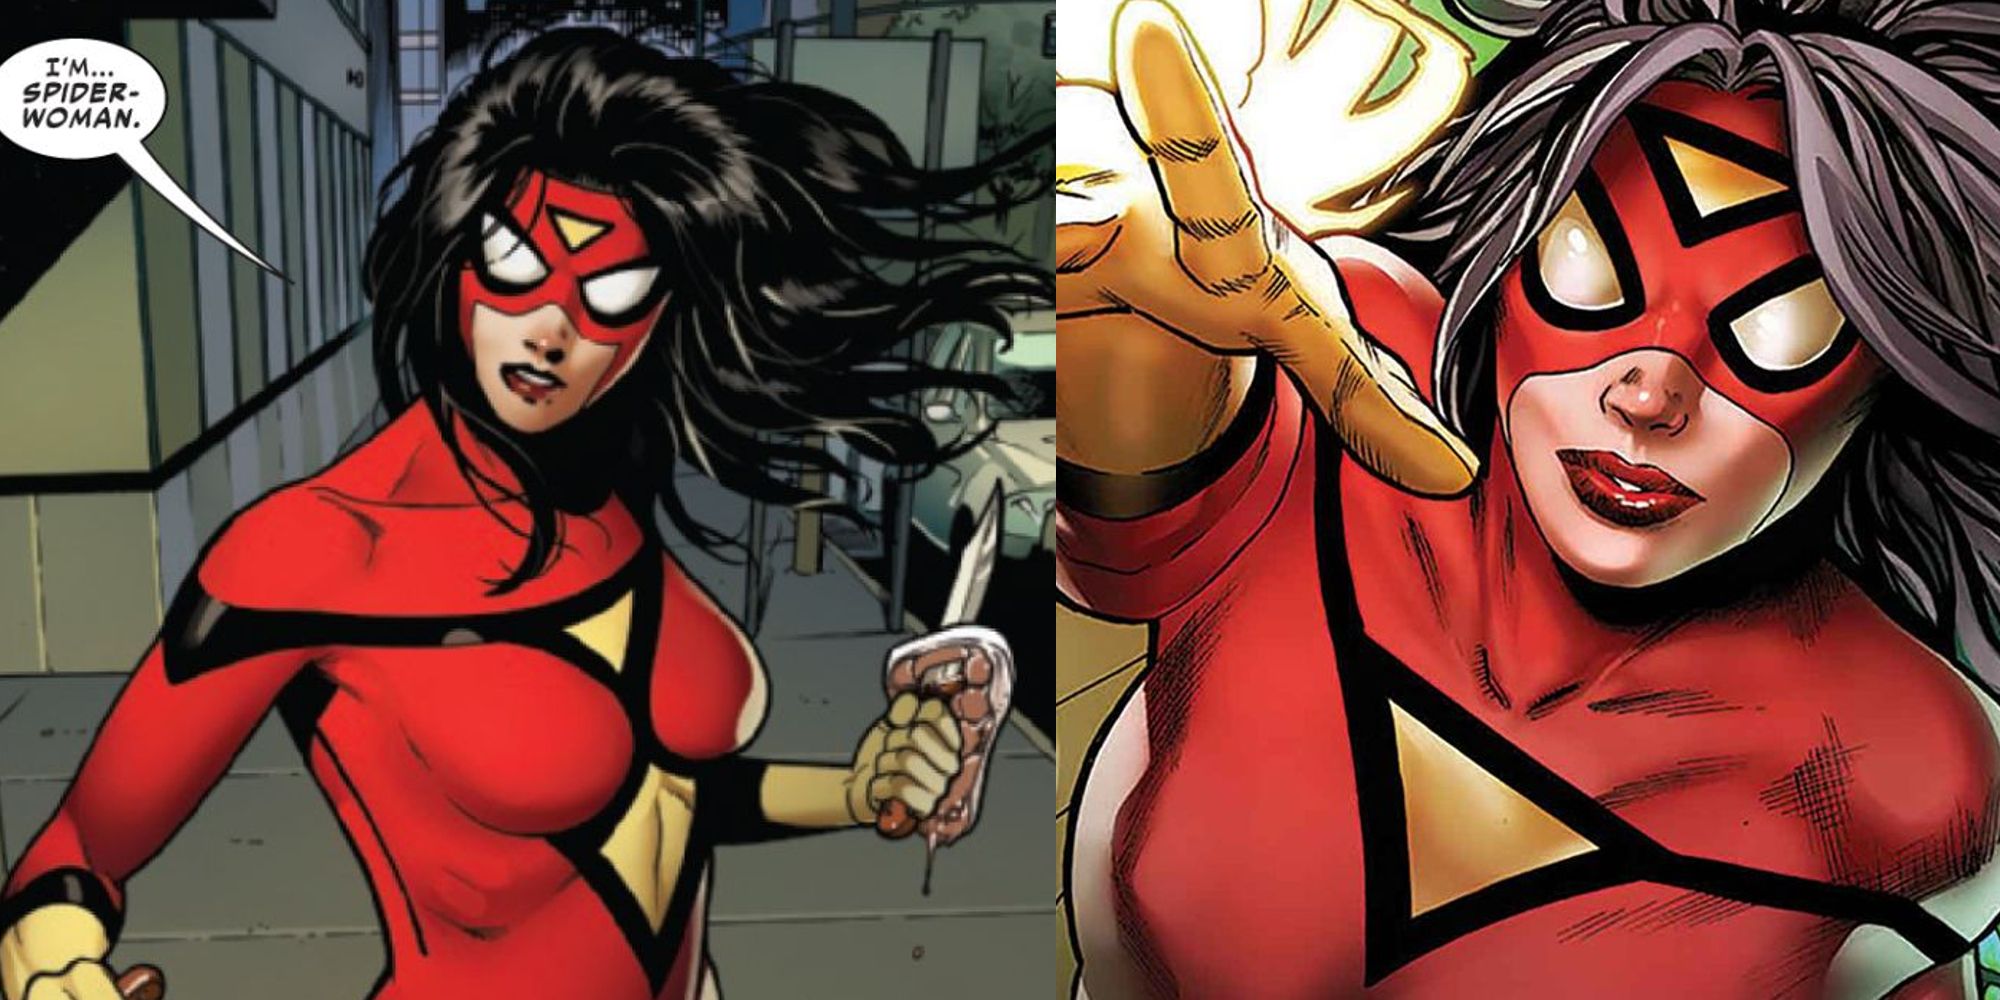 Marvel: 10 Best Spider-Woman Comics To Read